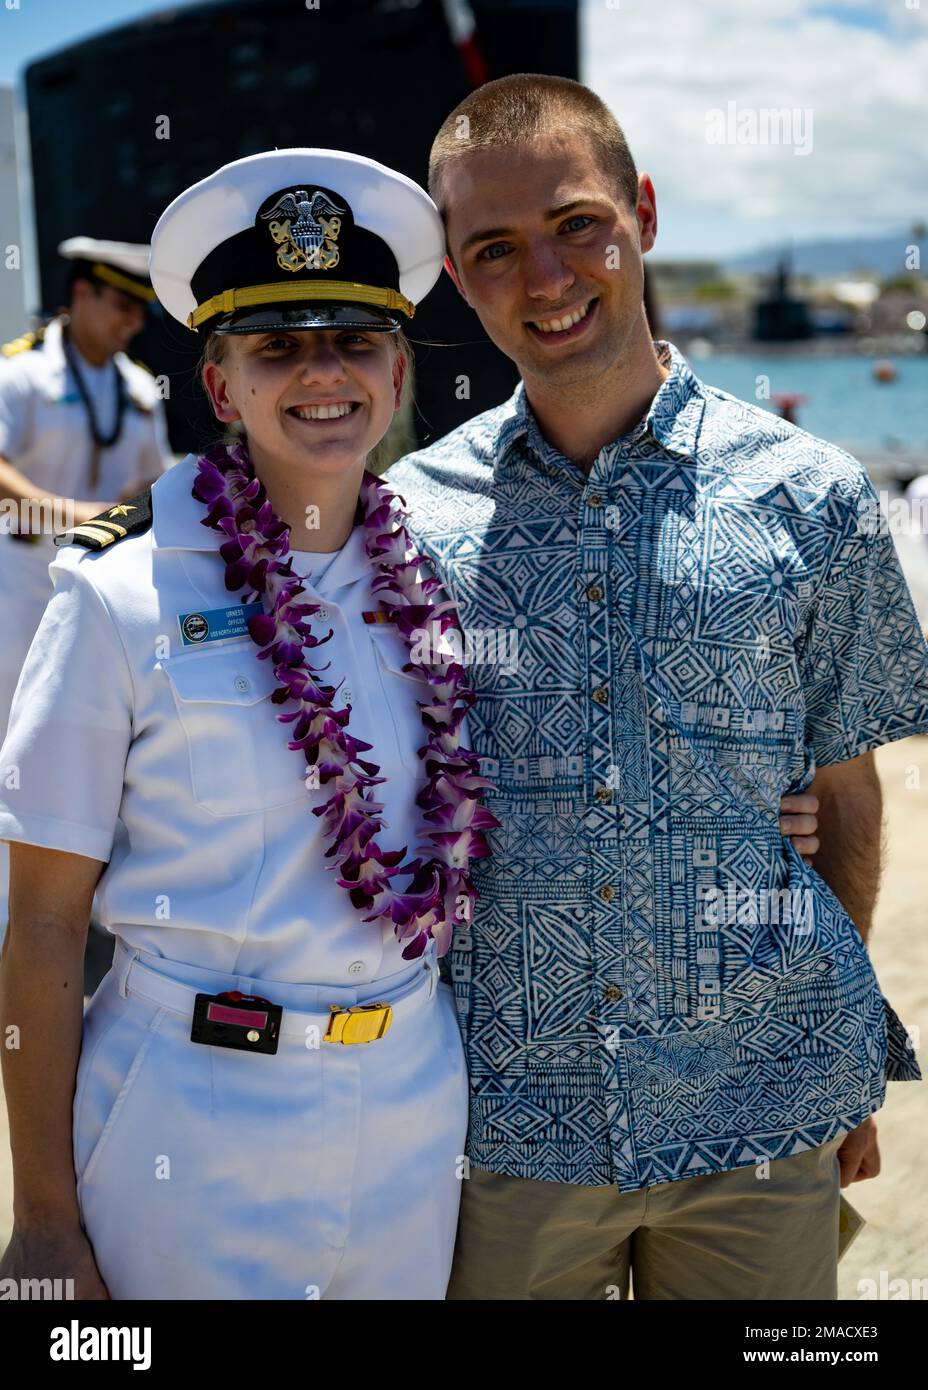 220525-N-LN285-2426 JOINT BASE PEARL HARBOR-HICKAM (May 25, 2022) -- Lt.j.g. Lisa Urness, from Oswego, Ore., assigned to the Virginia-class fast-attack submarine USS North Carolina (SSN 777) reunites with her family after the boat returns to Joint Base Pearl Harbor-Hickam from deployment in the 7th Fleet area of responsibility. North Carolina performed a full spectrum of operations, including anti-submarine and anti-surface warfare, during the extended seven-month, Indo-Pacific deployment. Stock Photo